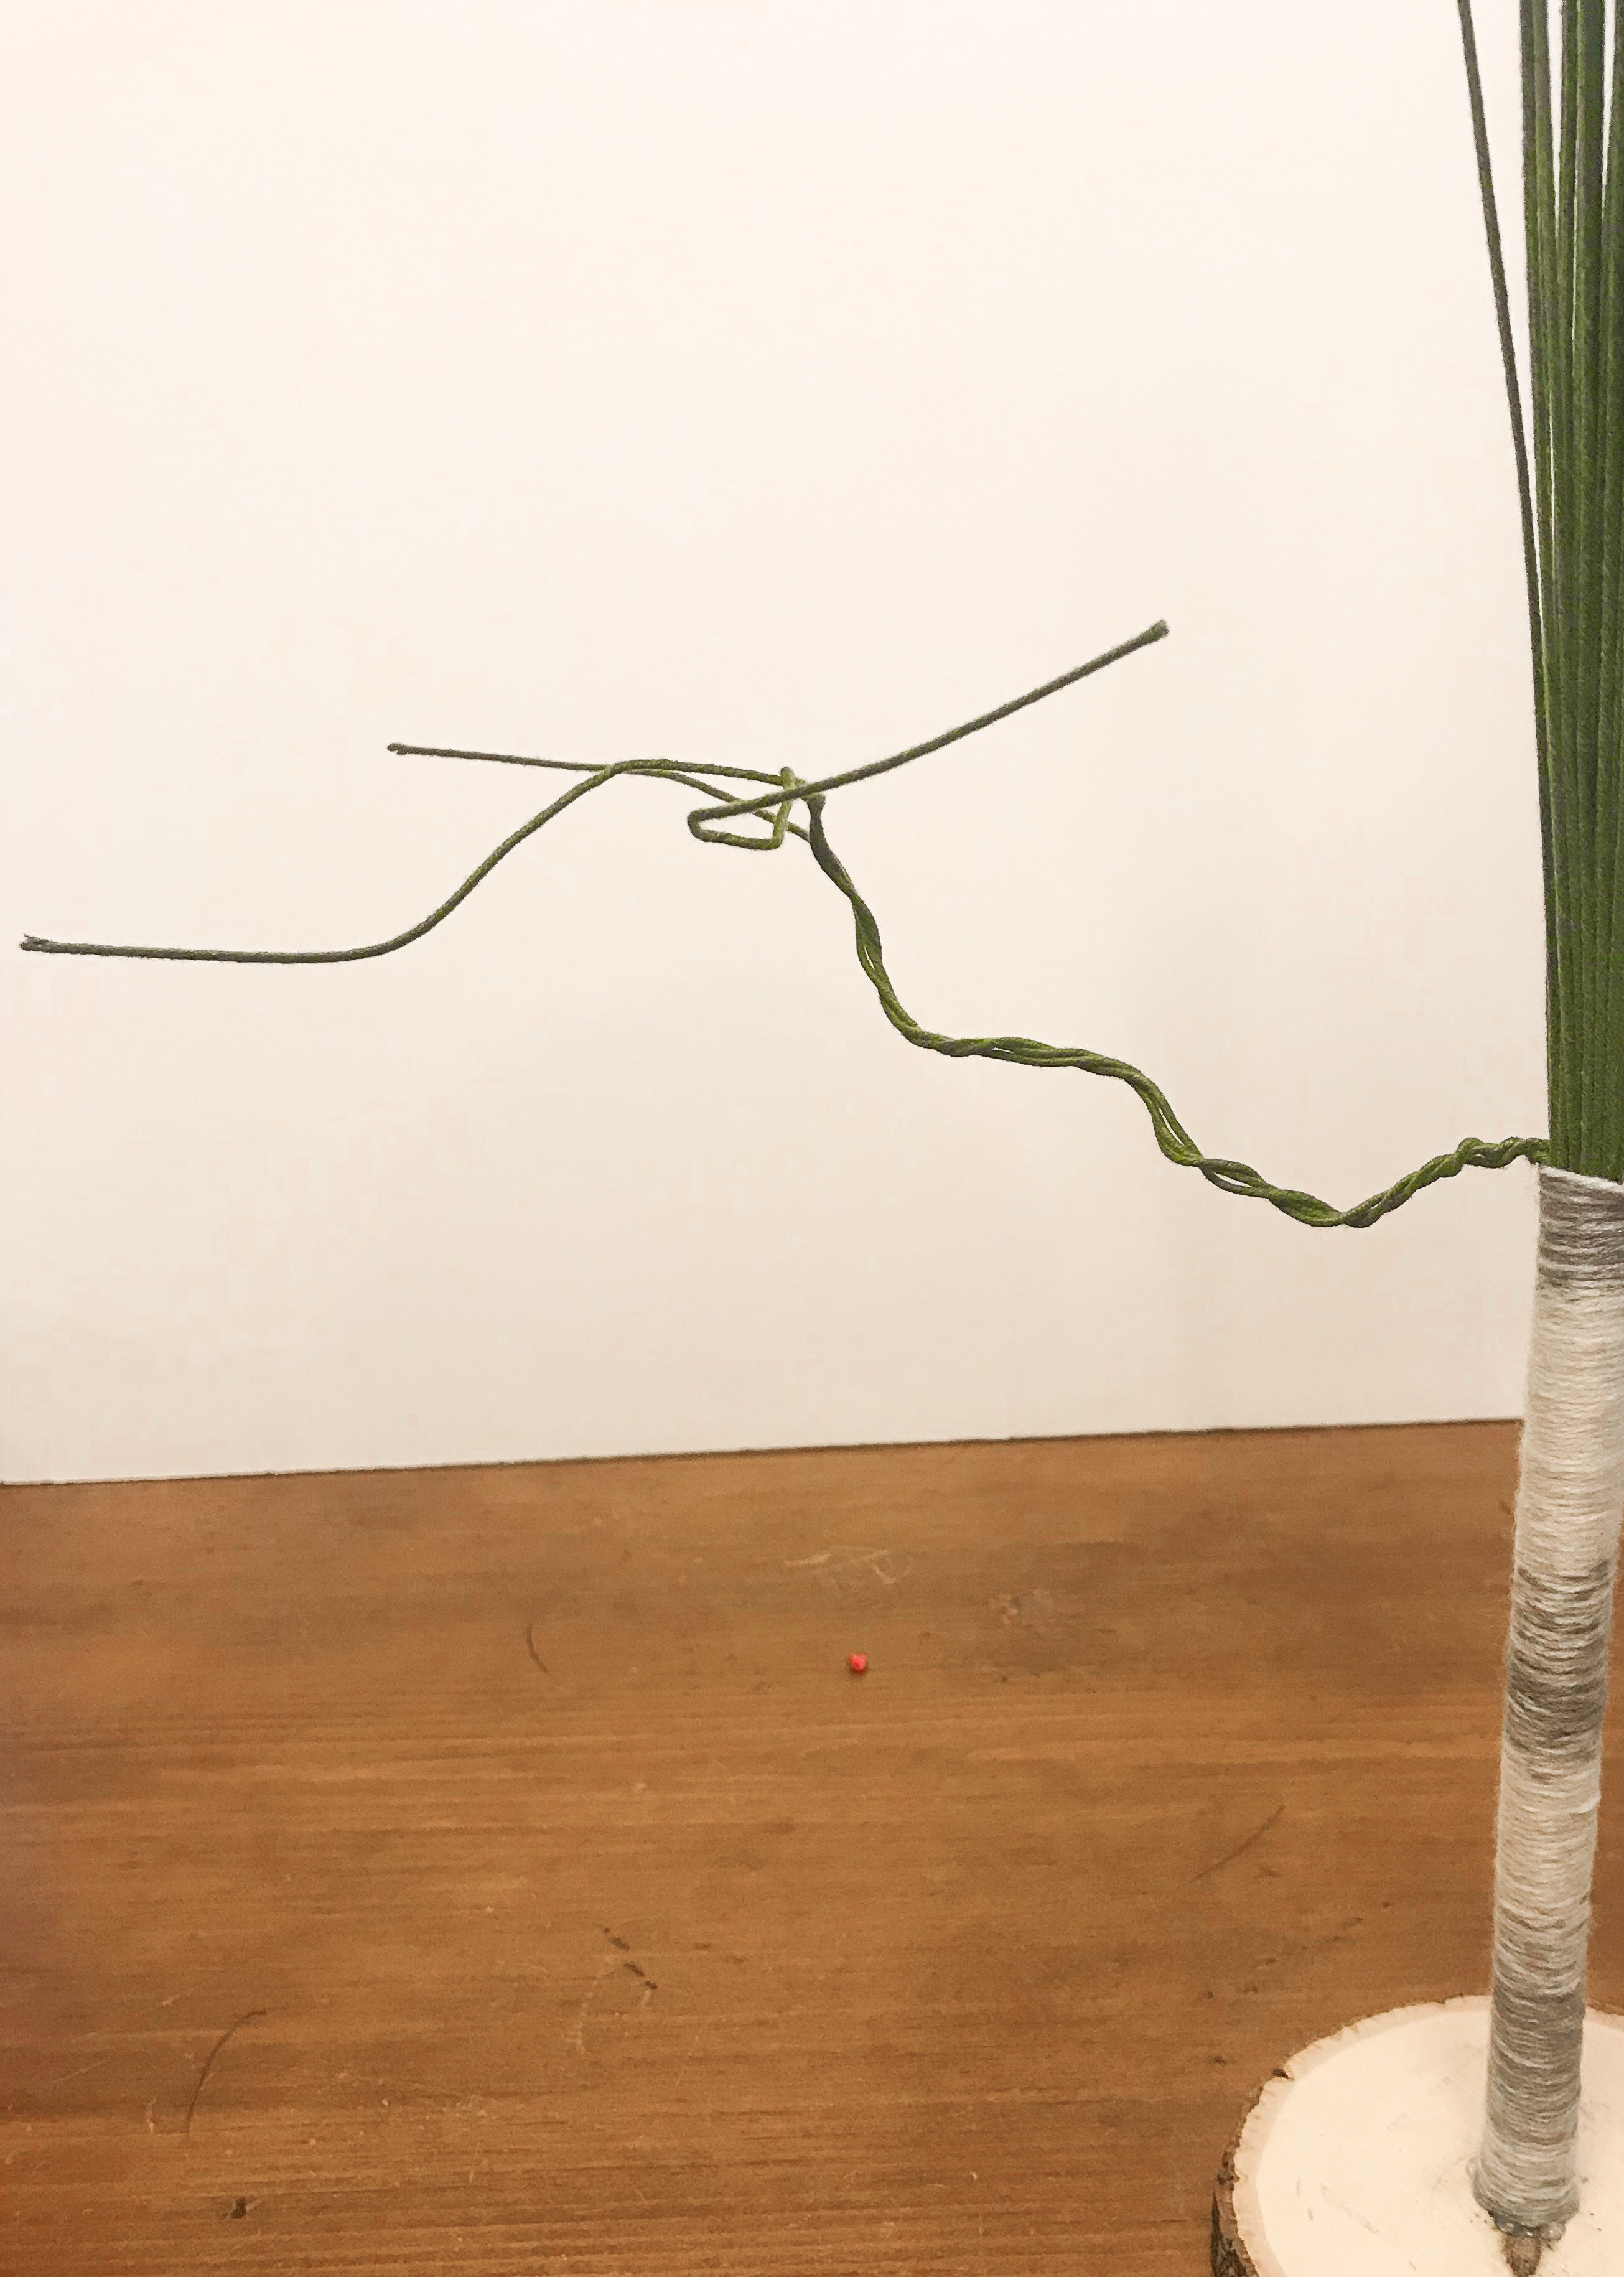 Three floral stems twisted away from yarn wrapped trunk and bent to form branches.